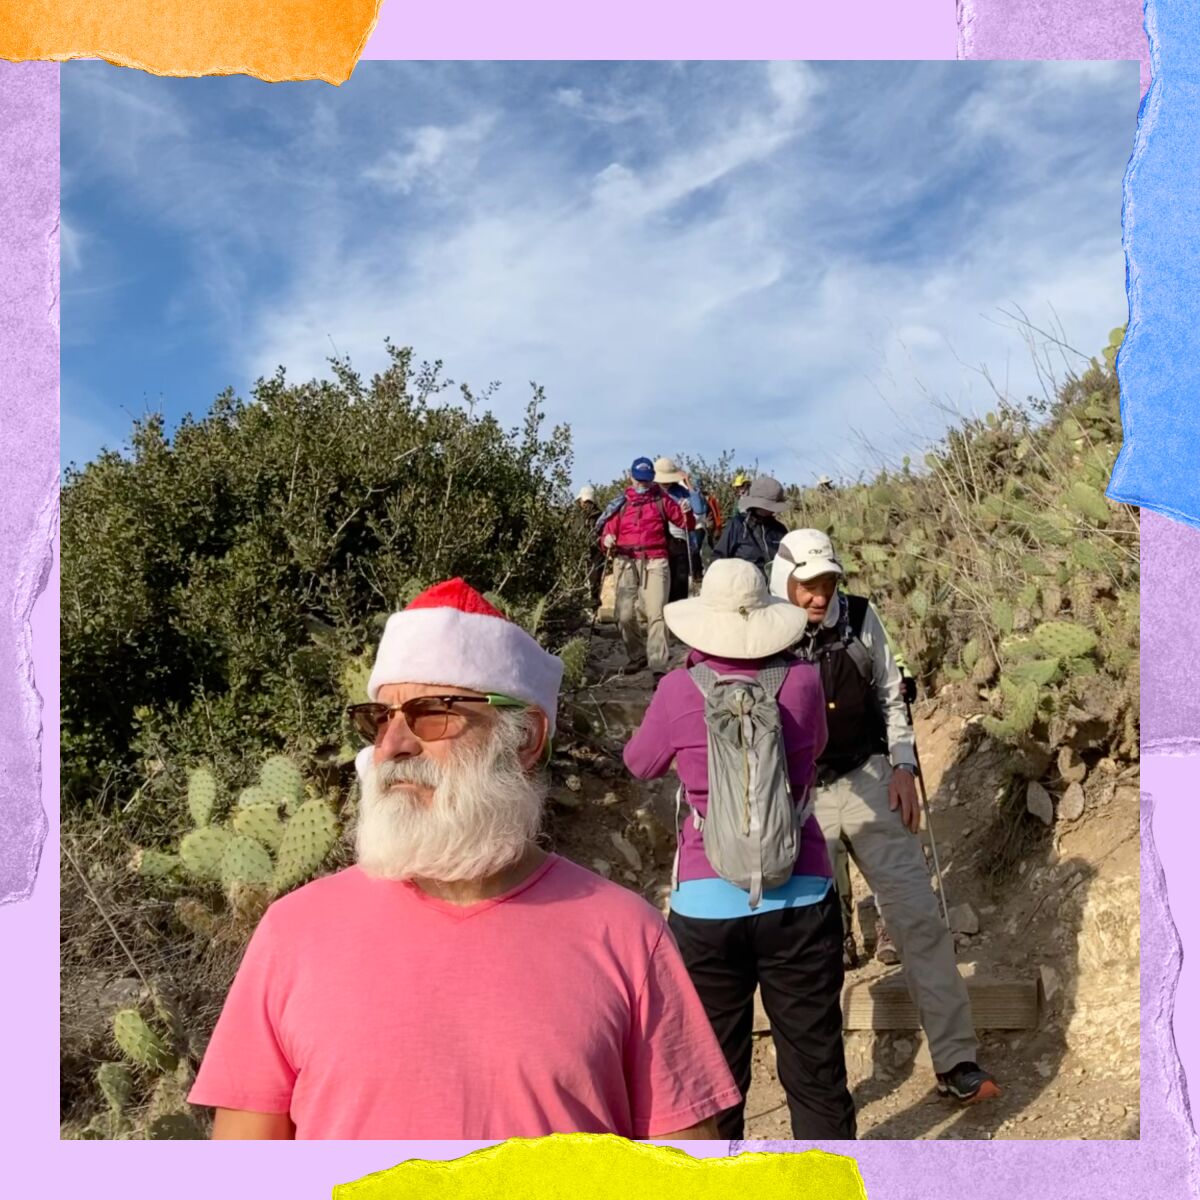 A man in a Santa hat along with other Sierra Club hikers in San Pedro